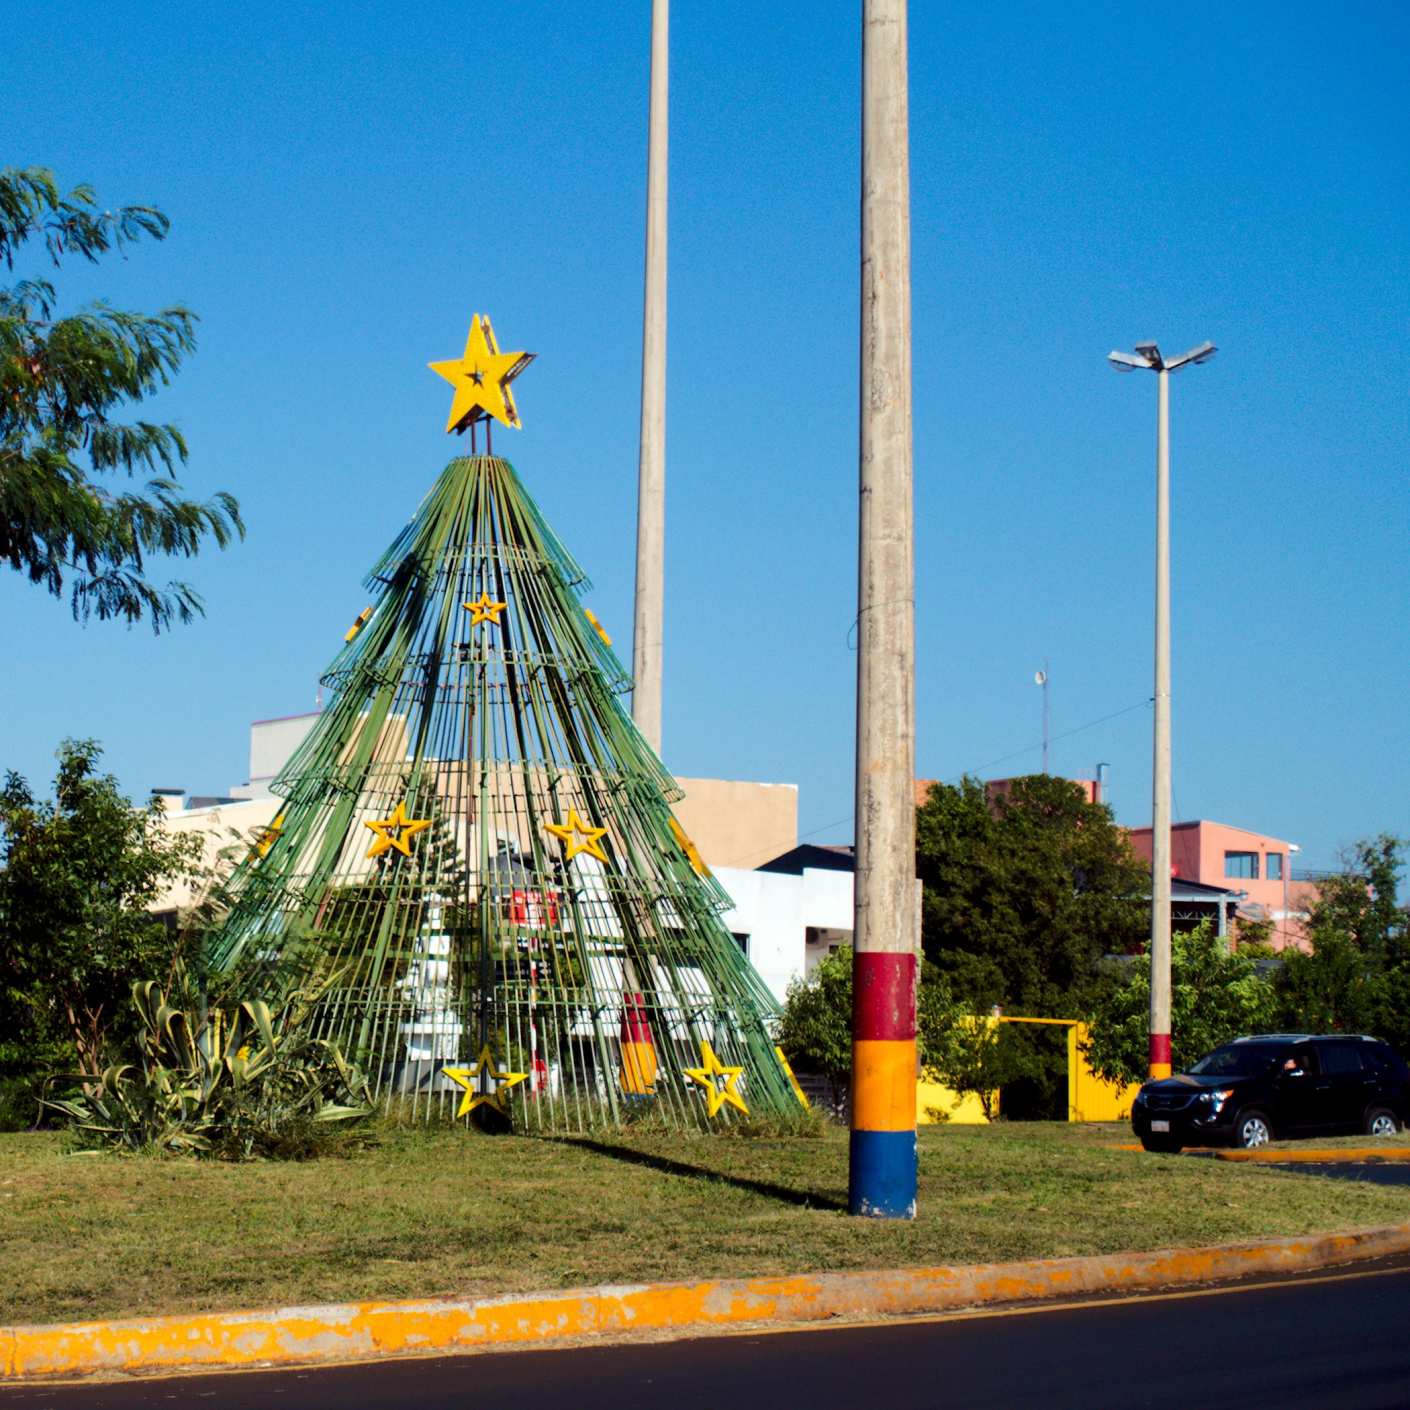 Chiristams in Paraguay